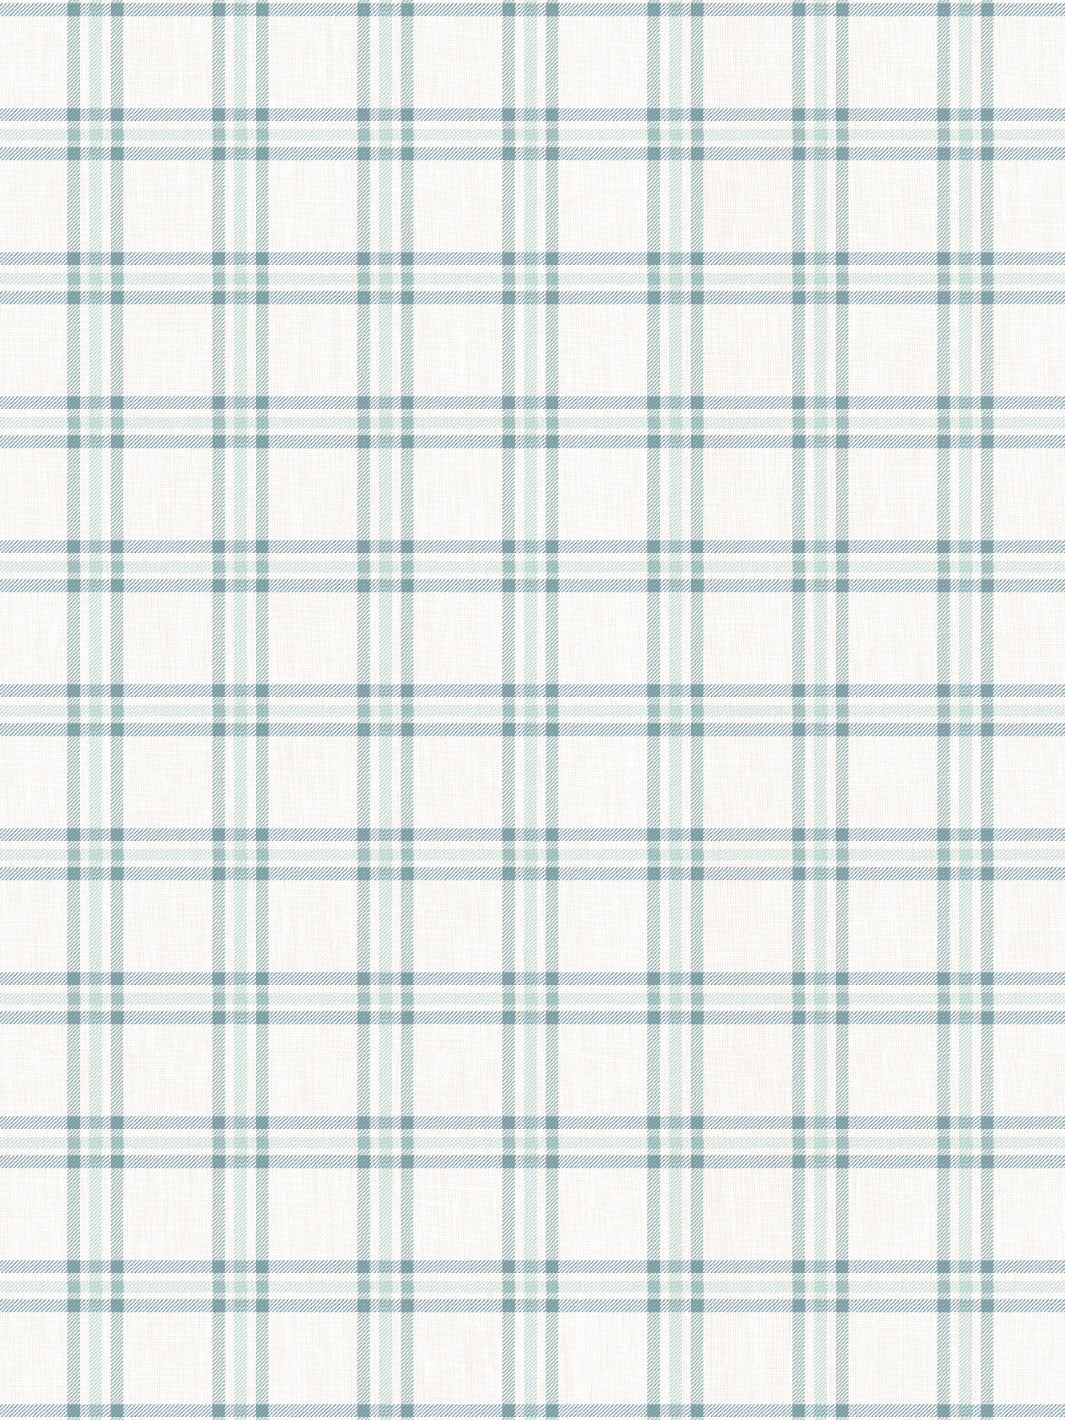 'Rogers Plaid' Linen Fabric by Nathan Turner - Seafoam